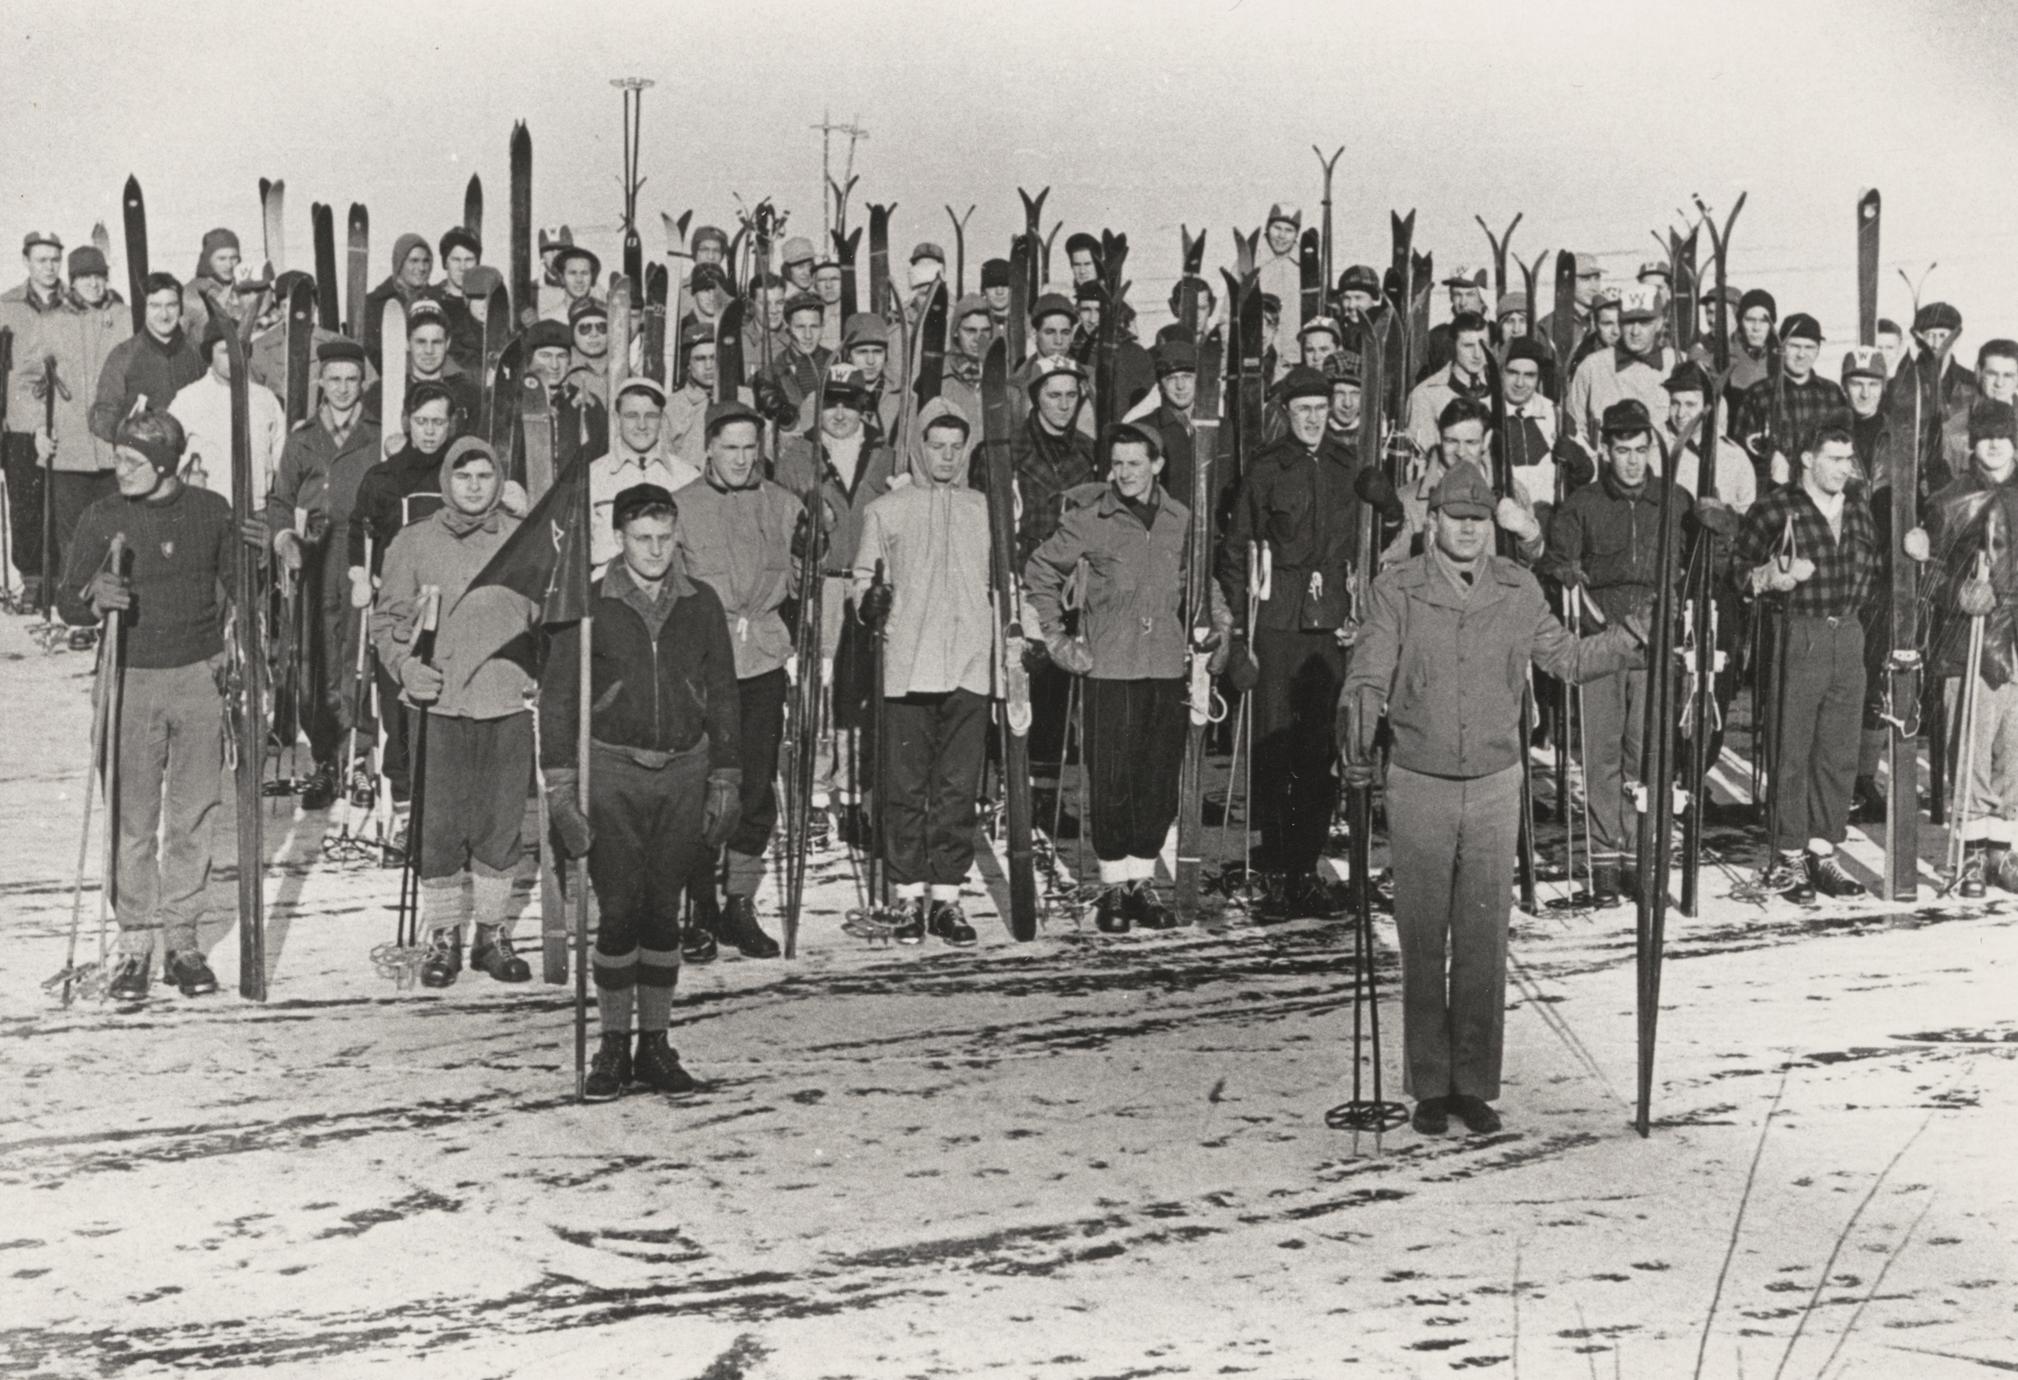 ROTC cadets with skis